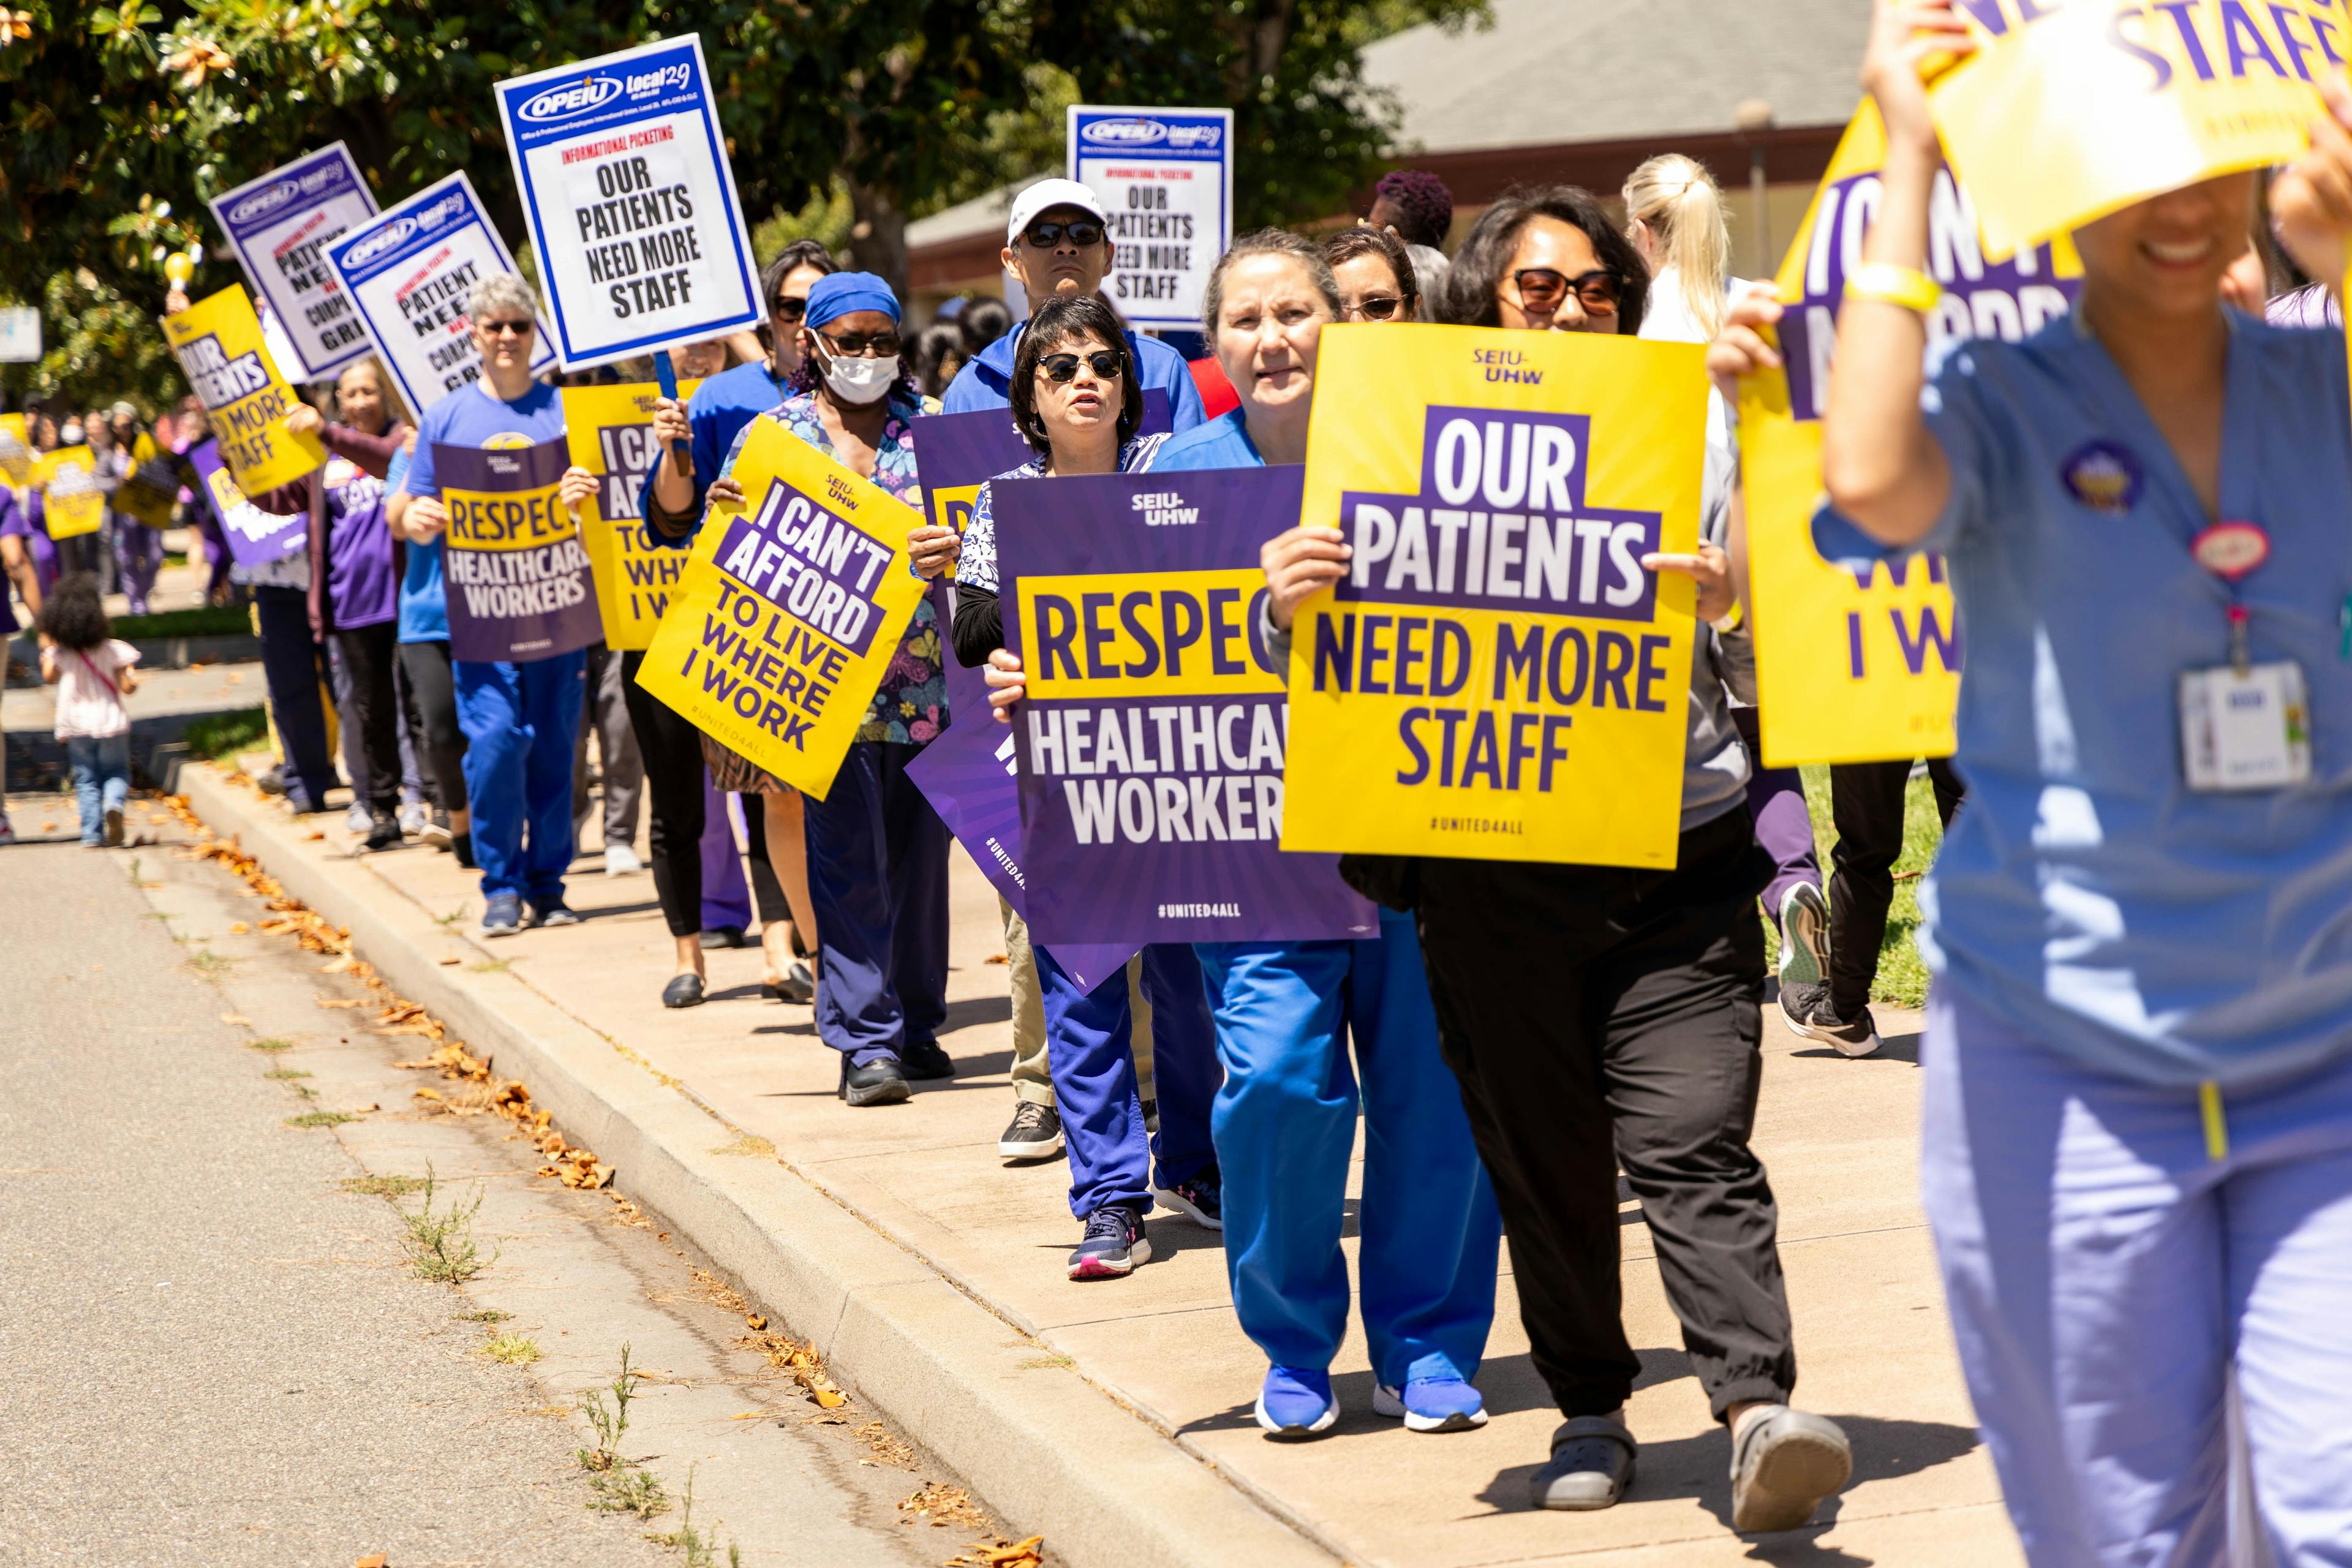 On strike: More than 75,000 Kaiser Permanente workers stage walkout